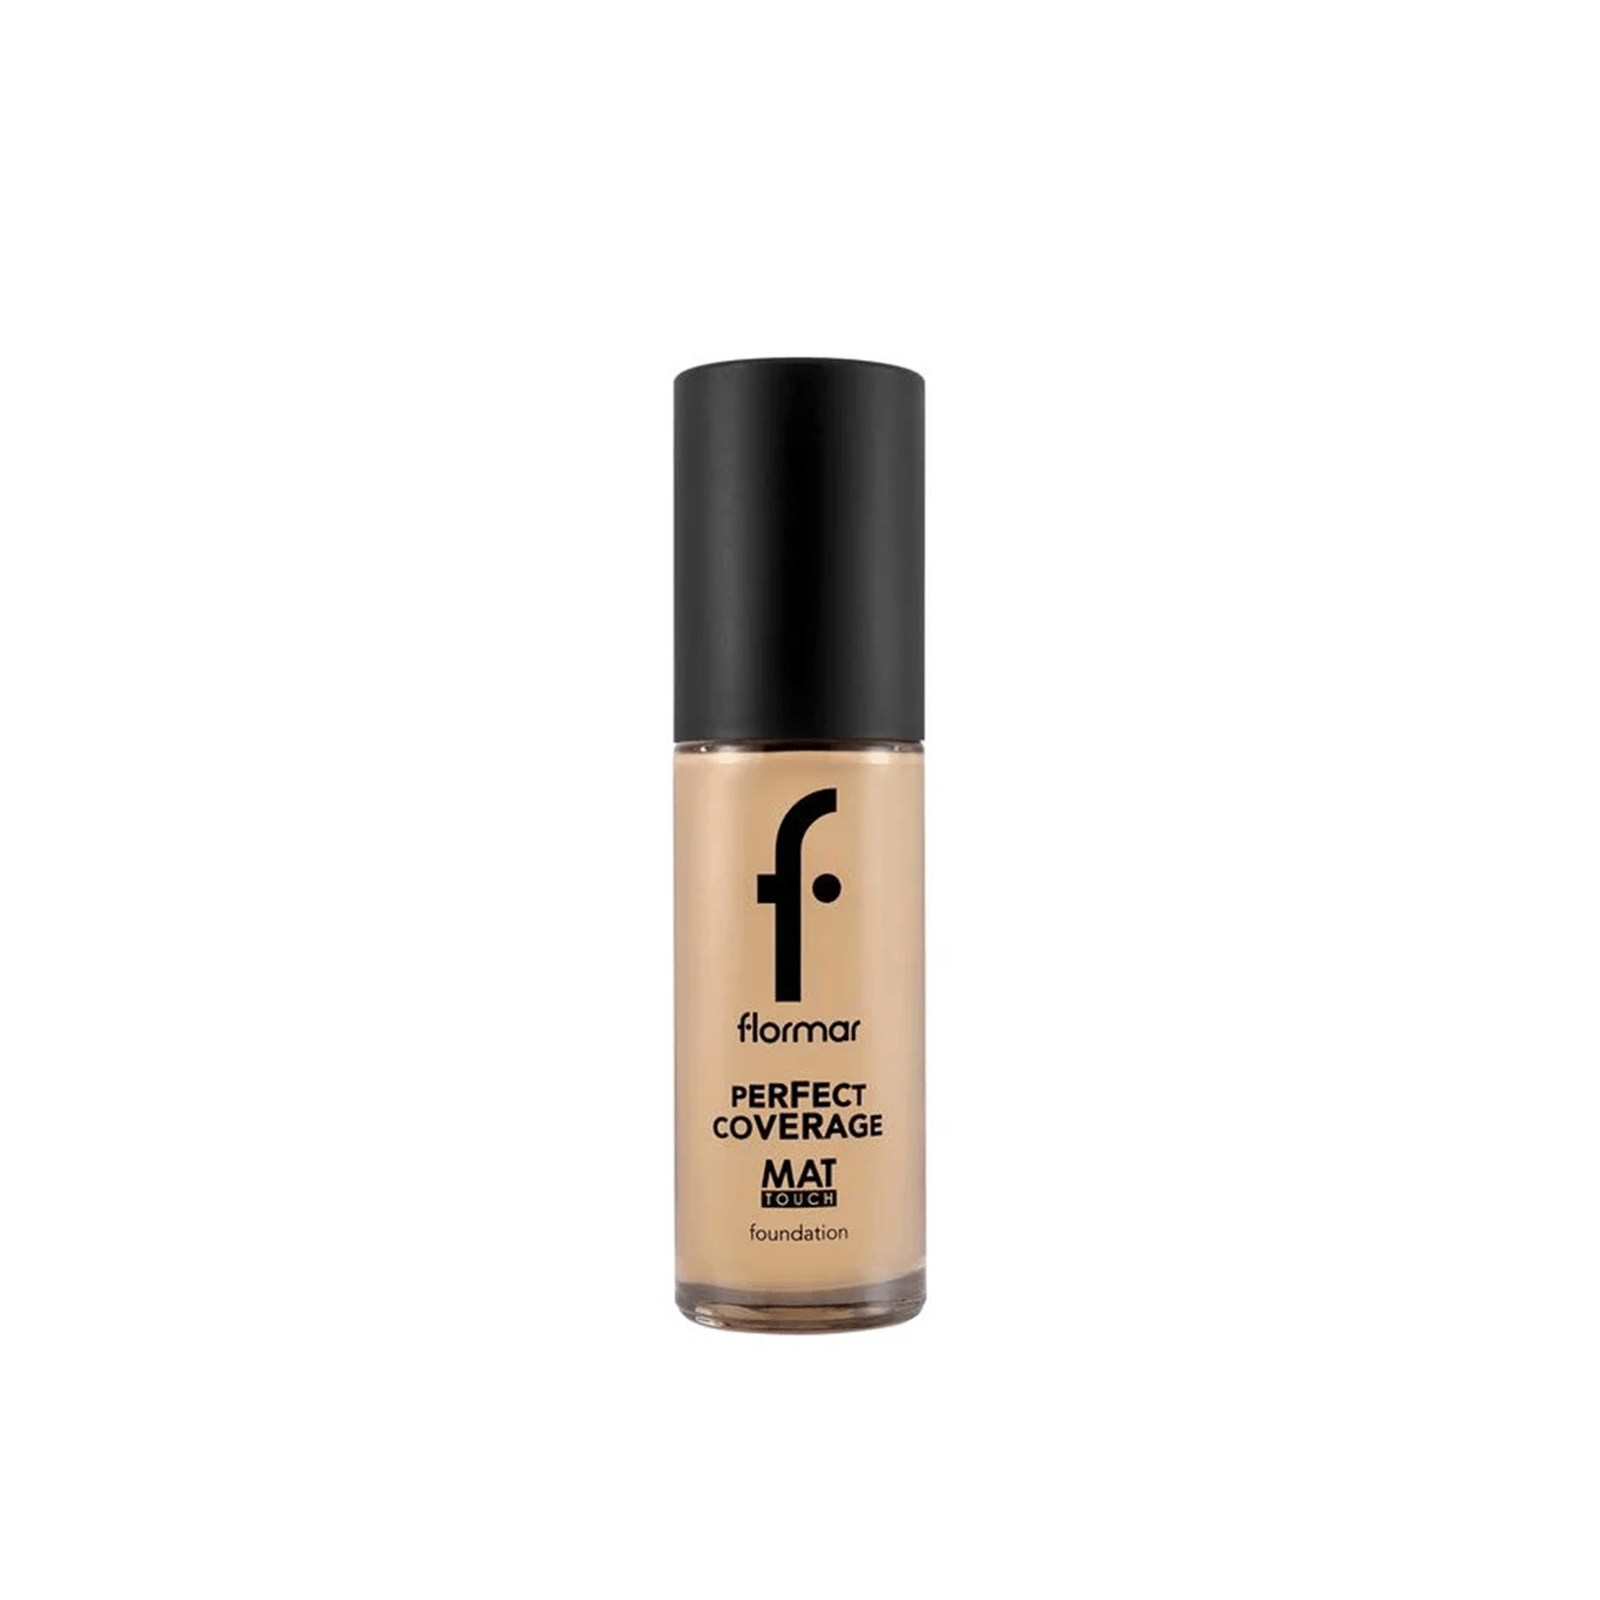 Flormar Perfect Coverage Mat Touch Foundation 303 Classic Beige 30ml (1.01floz)